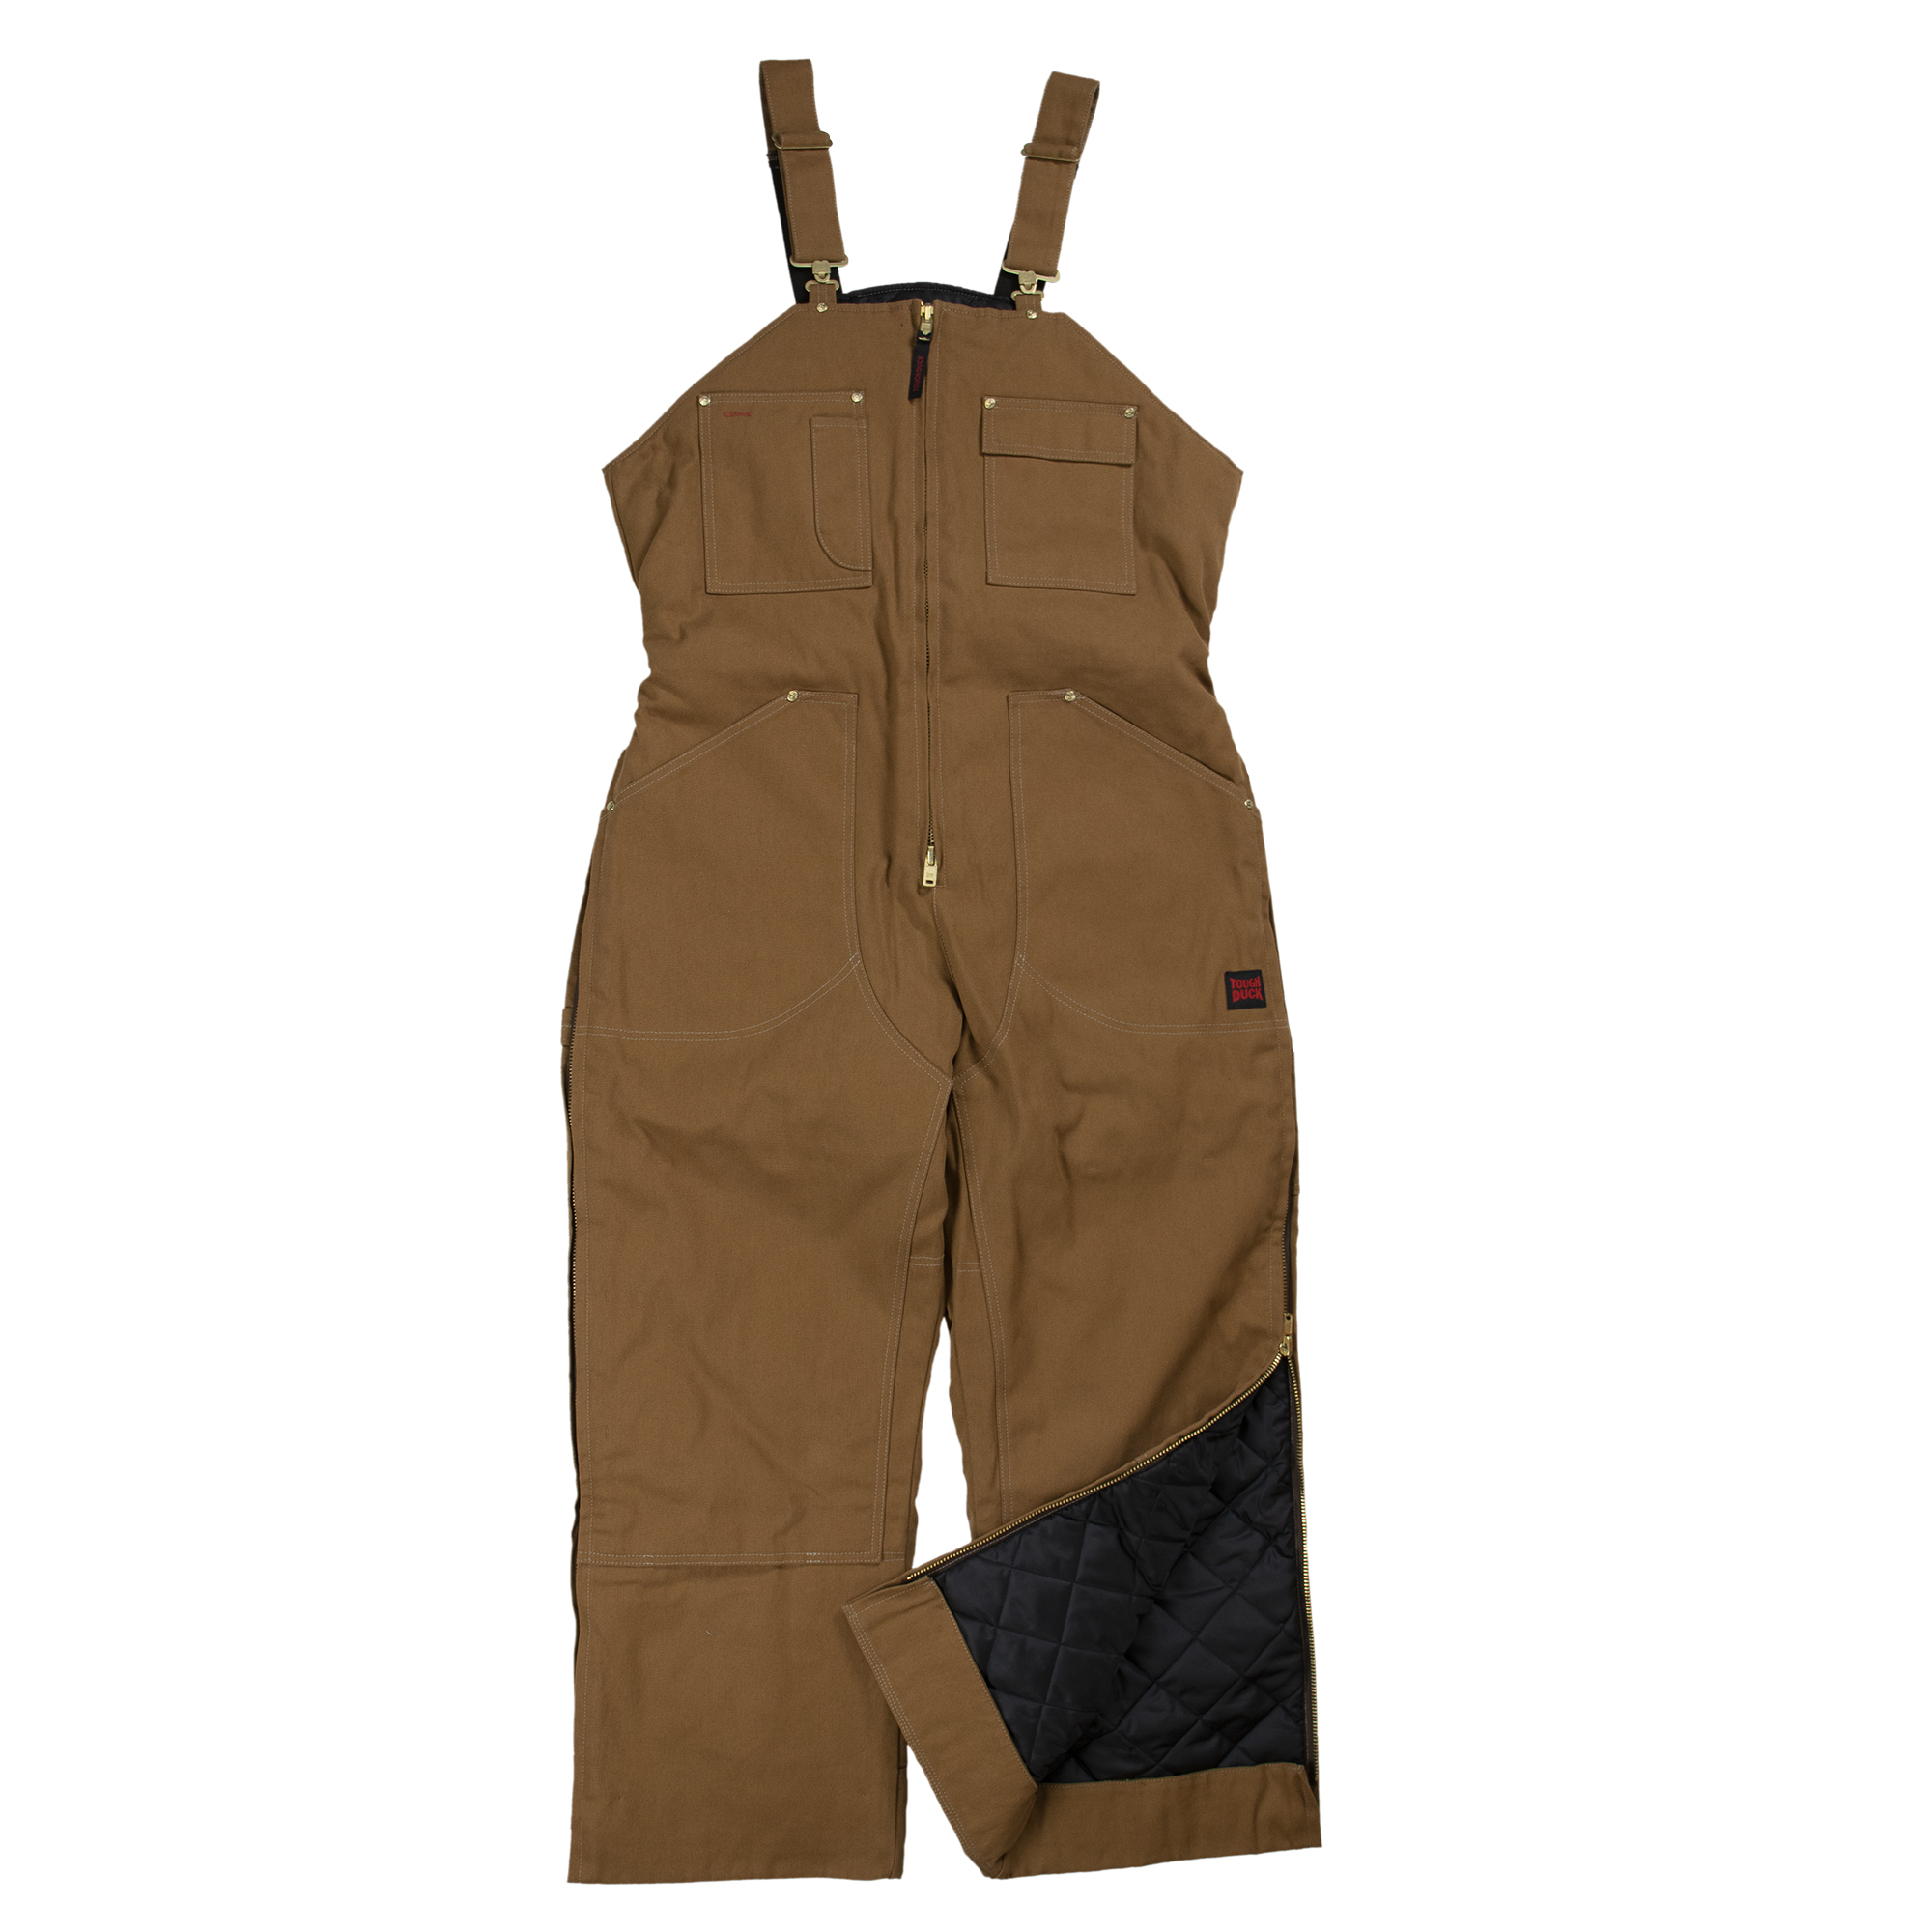 Tough Duck, Insulated Bib Overall, Size L, Color Brown, Model WB031